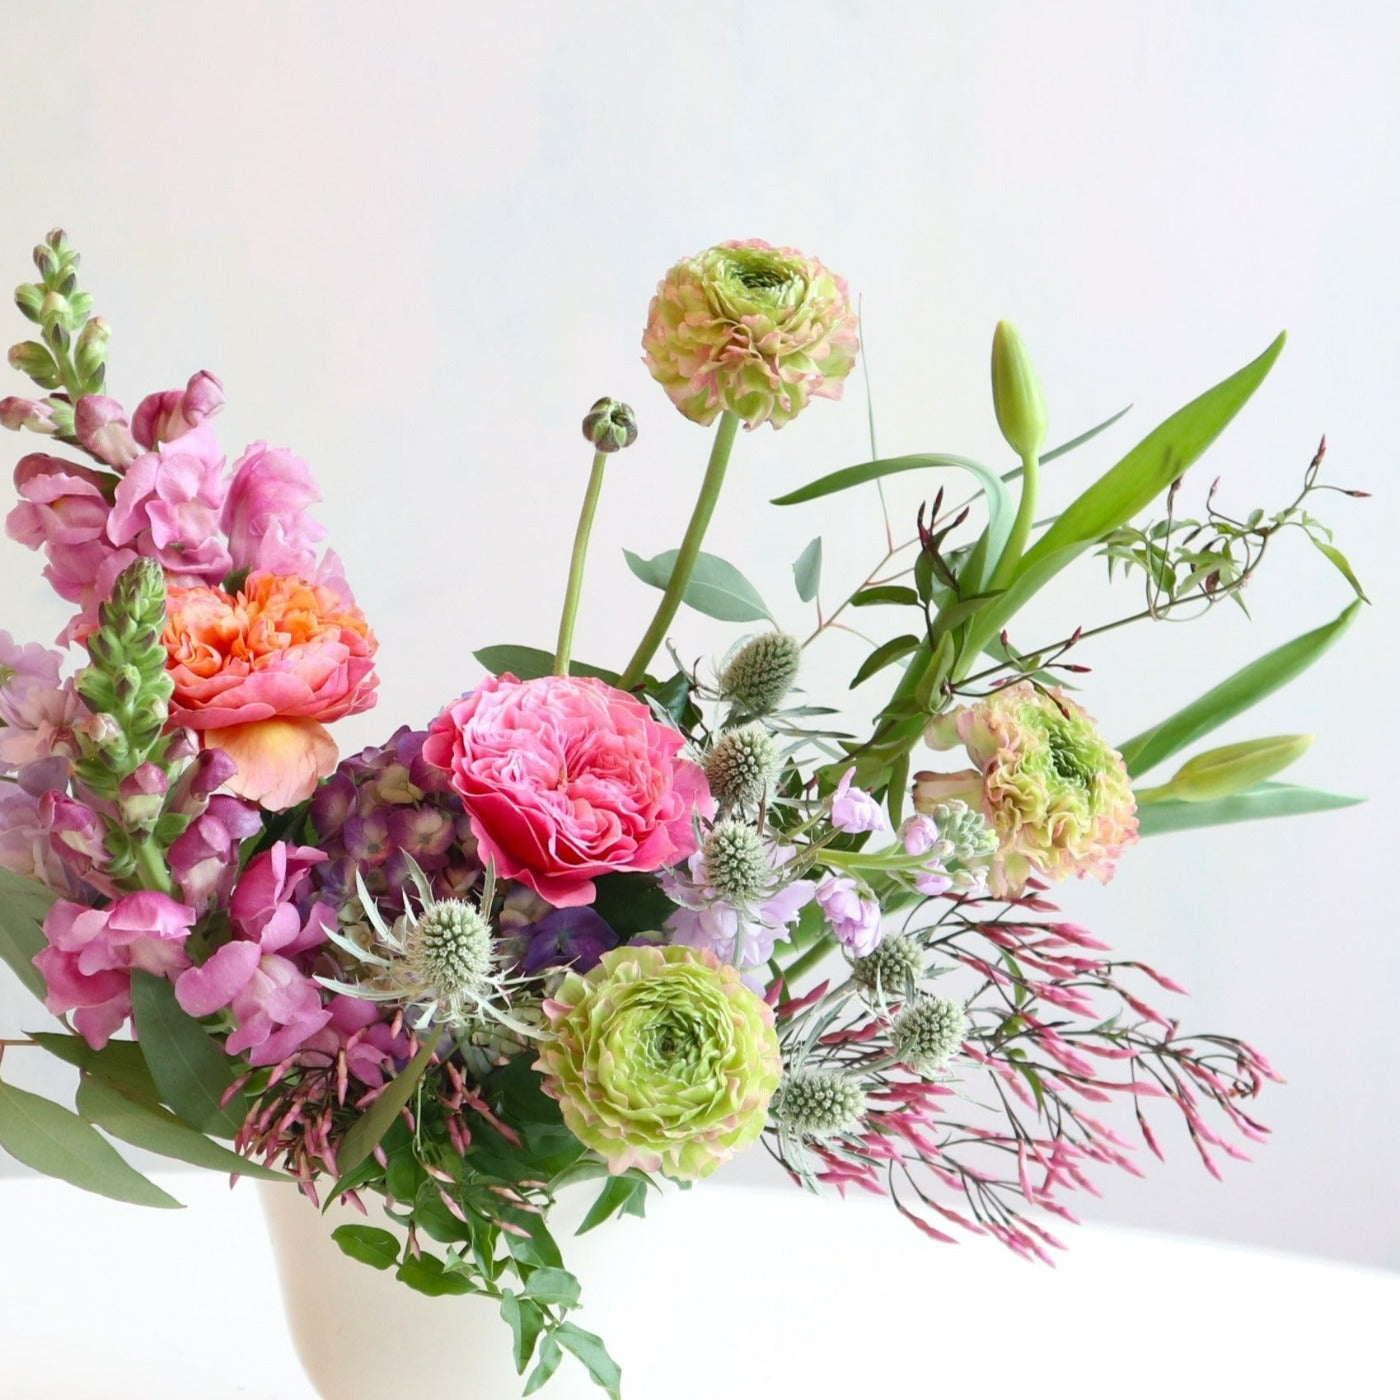 Enchanted | Close up on the arrangement of pinks, purples, and greens in a white vase.